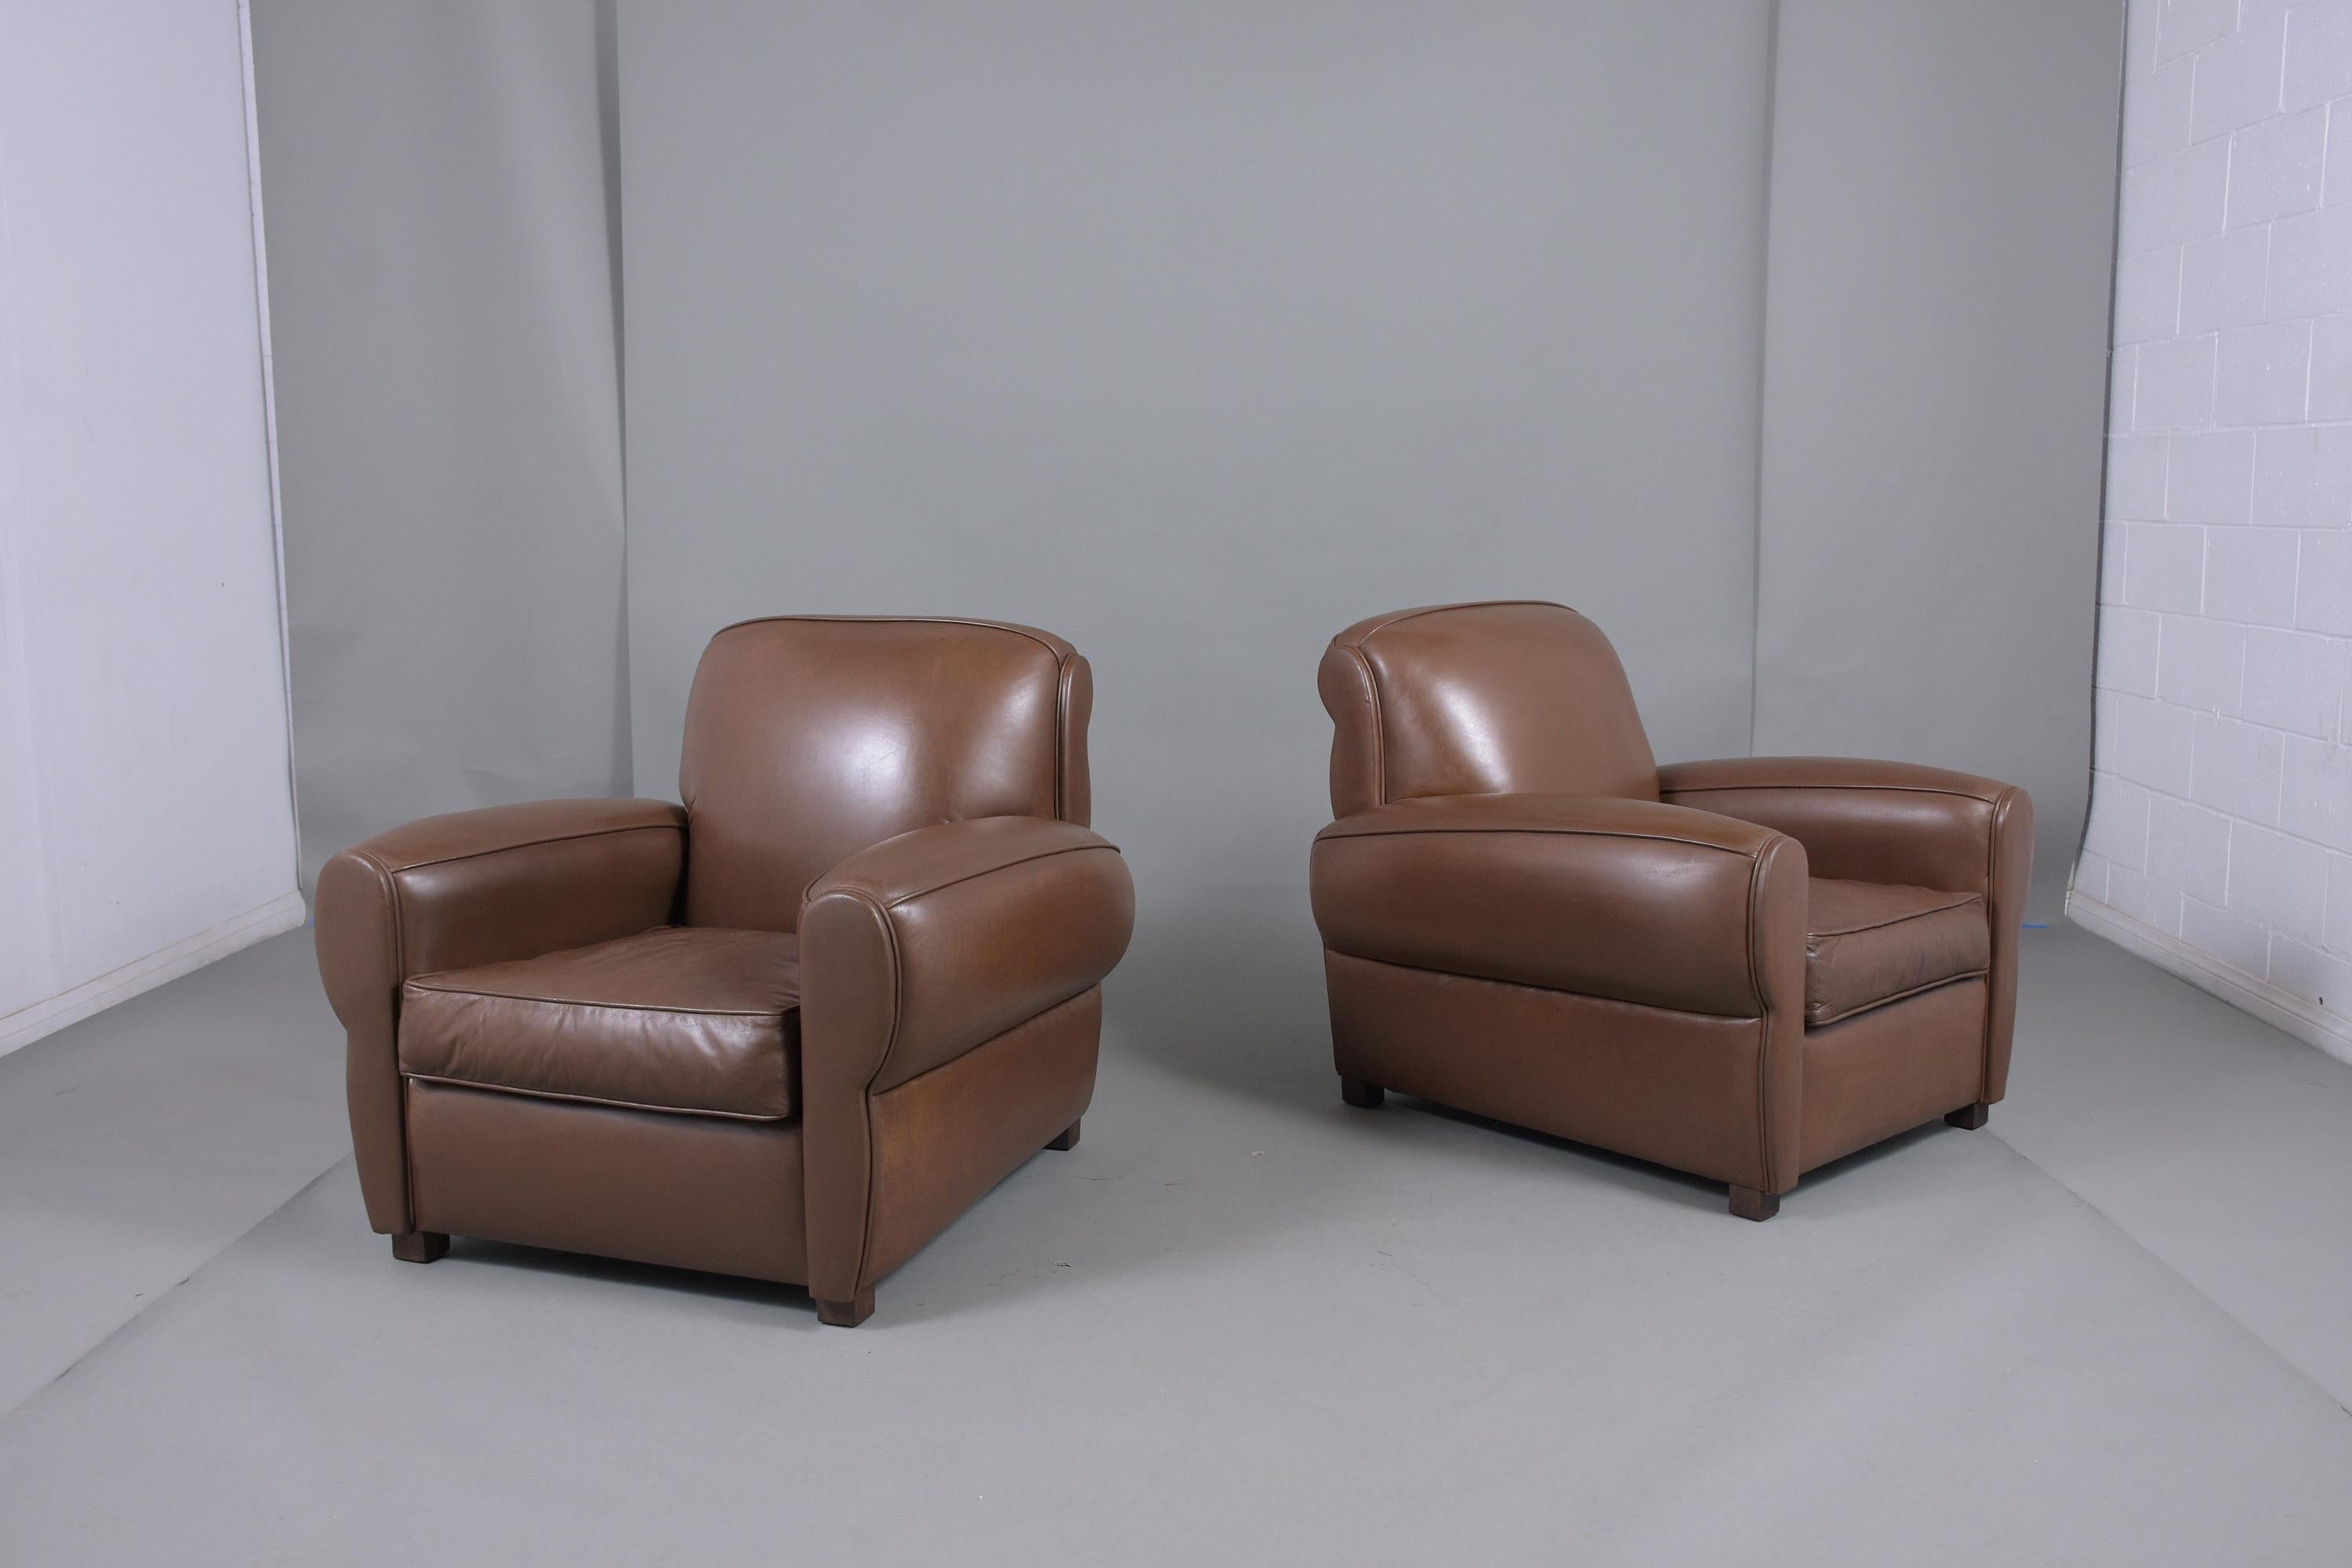 An extraordinary pair of vintage Art Deco-style club chairs are crafted out of wood and leather and restored by our team of expert craftsmen. This fabulous set of lounge chairs features the original brown leather upholstery and is in a good